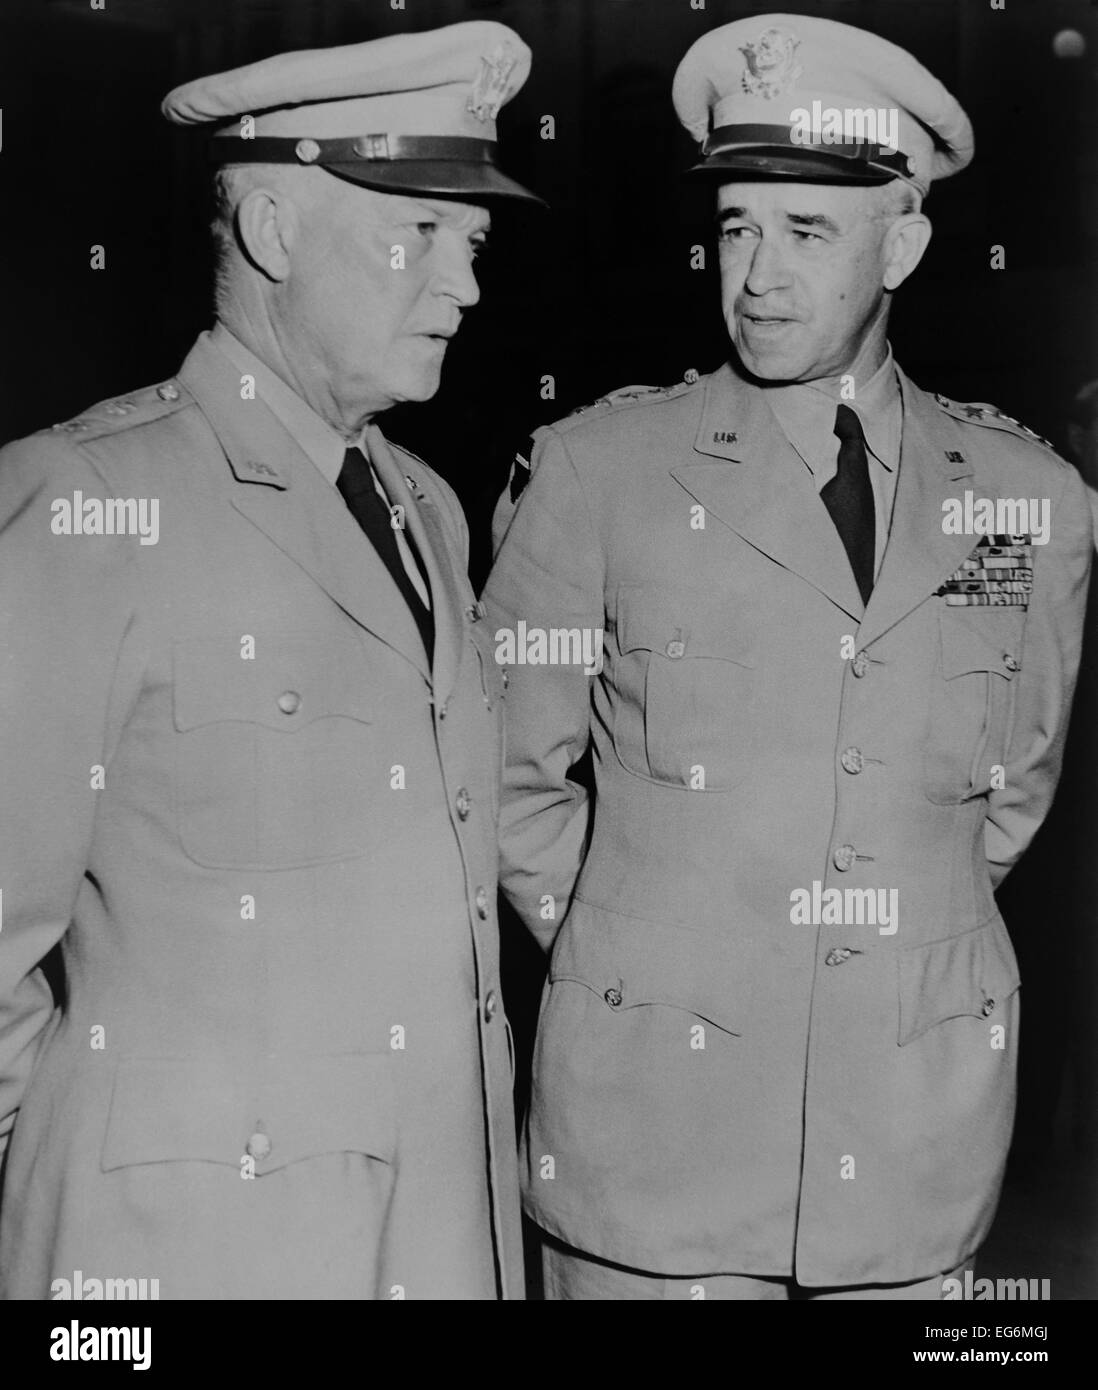 Generals Dwight Eisenhower and Omar Bradley, July 19, 1948. They were attending the funeral of General of the WW1 Armies, John Stock Photo